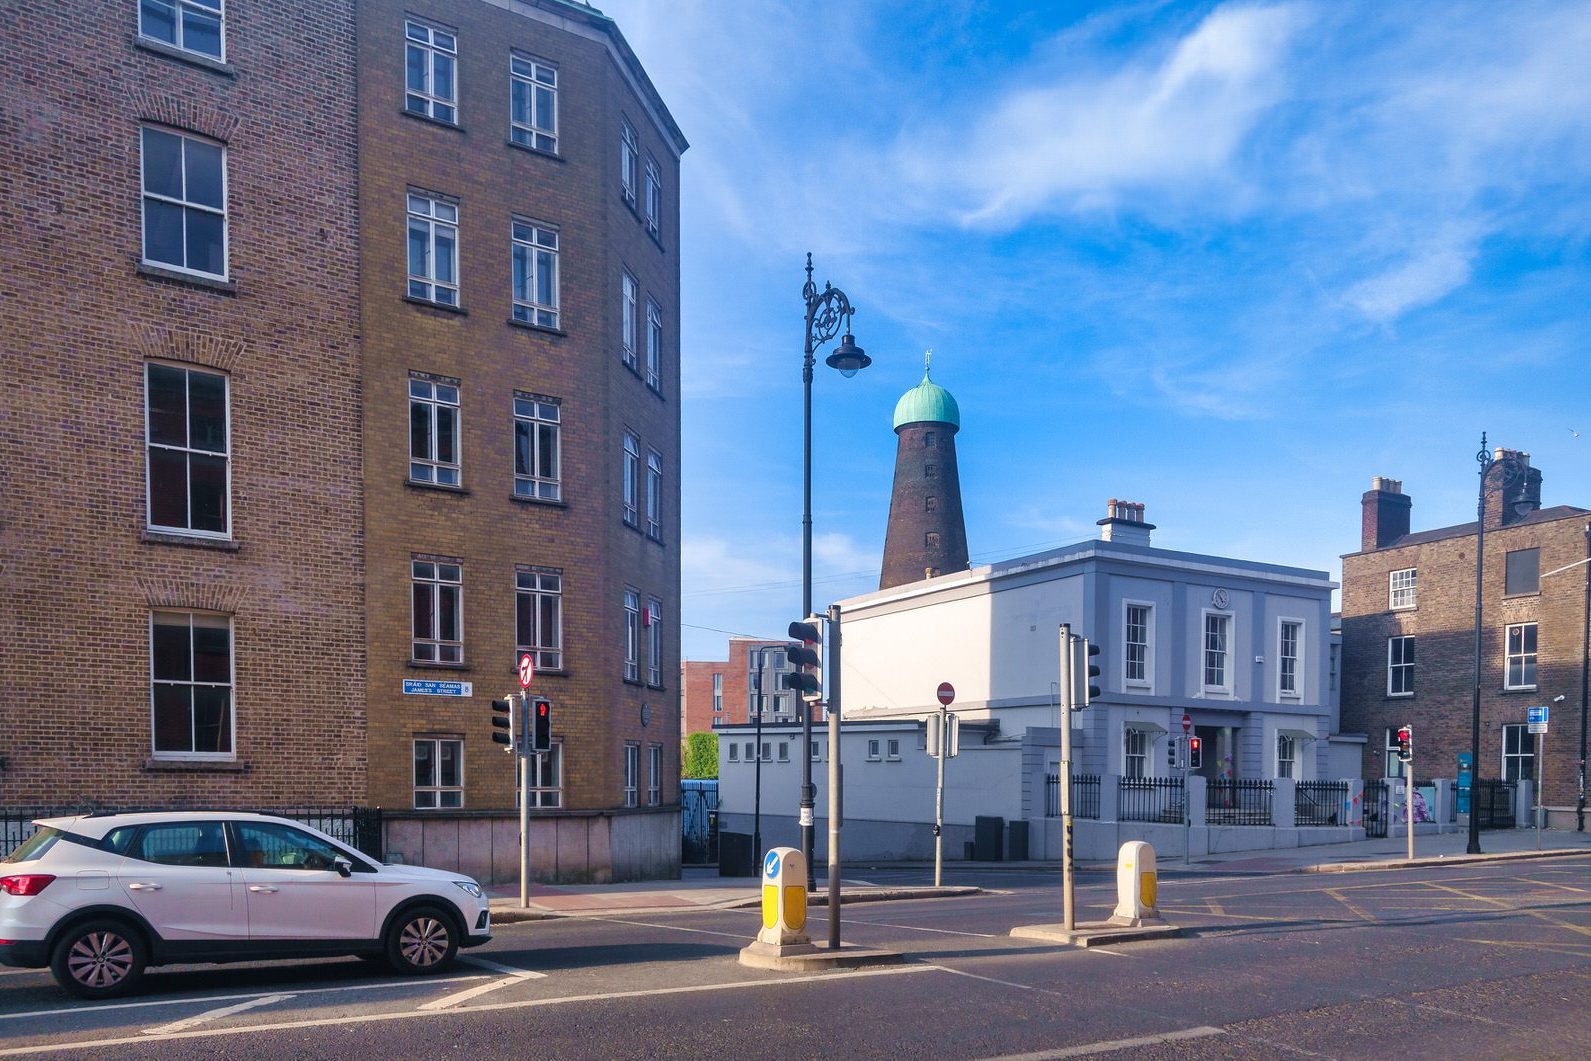 ONCE THE LARGEST SMOCK WINDMILL IN EUROPE [ST PATRICK'S TOWER ON WATLING STREET] 001